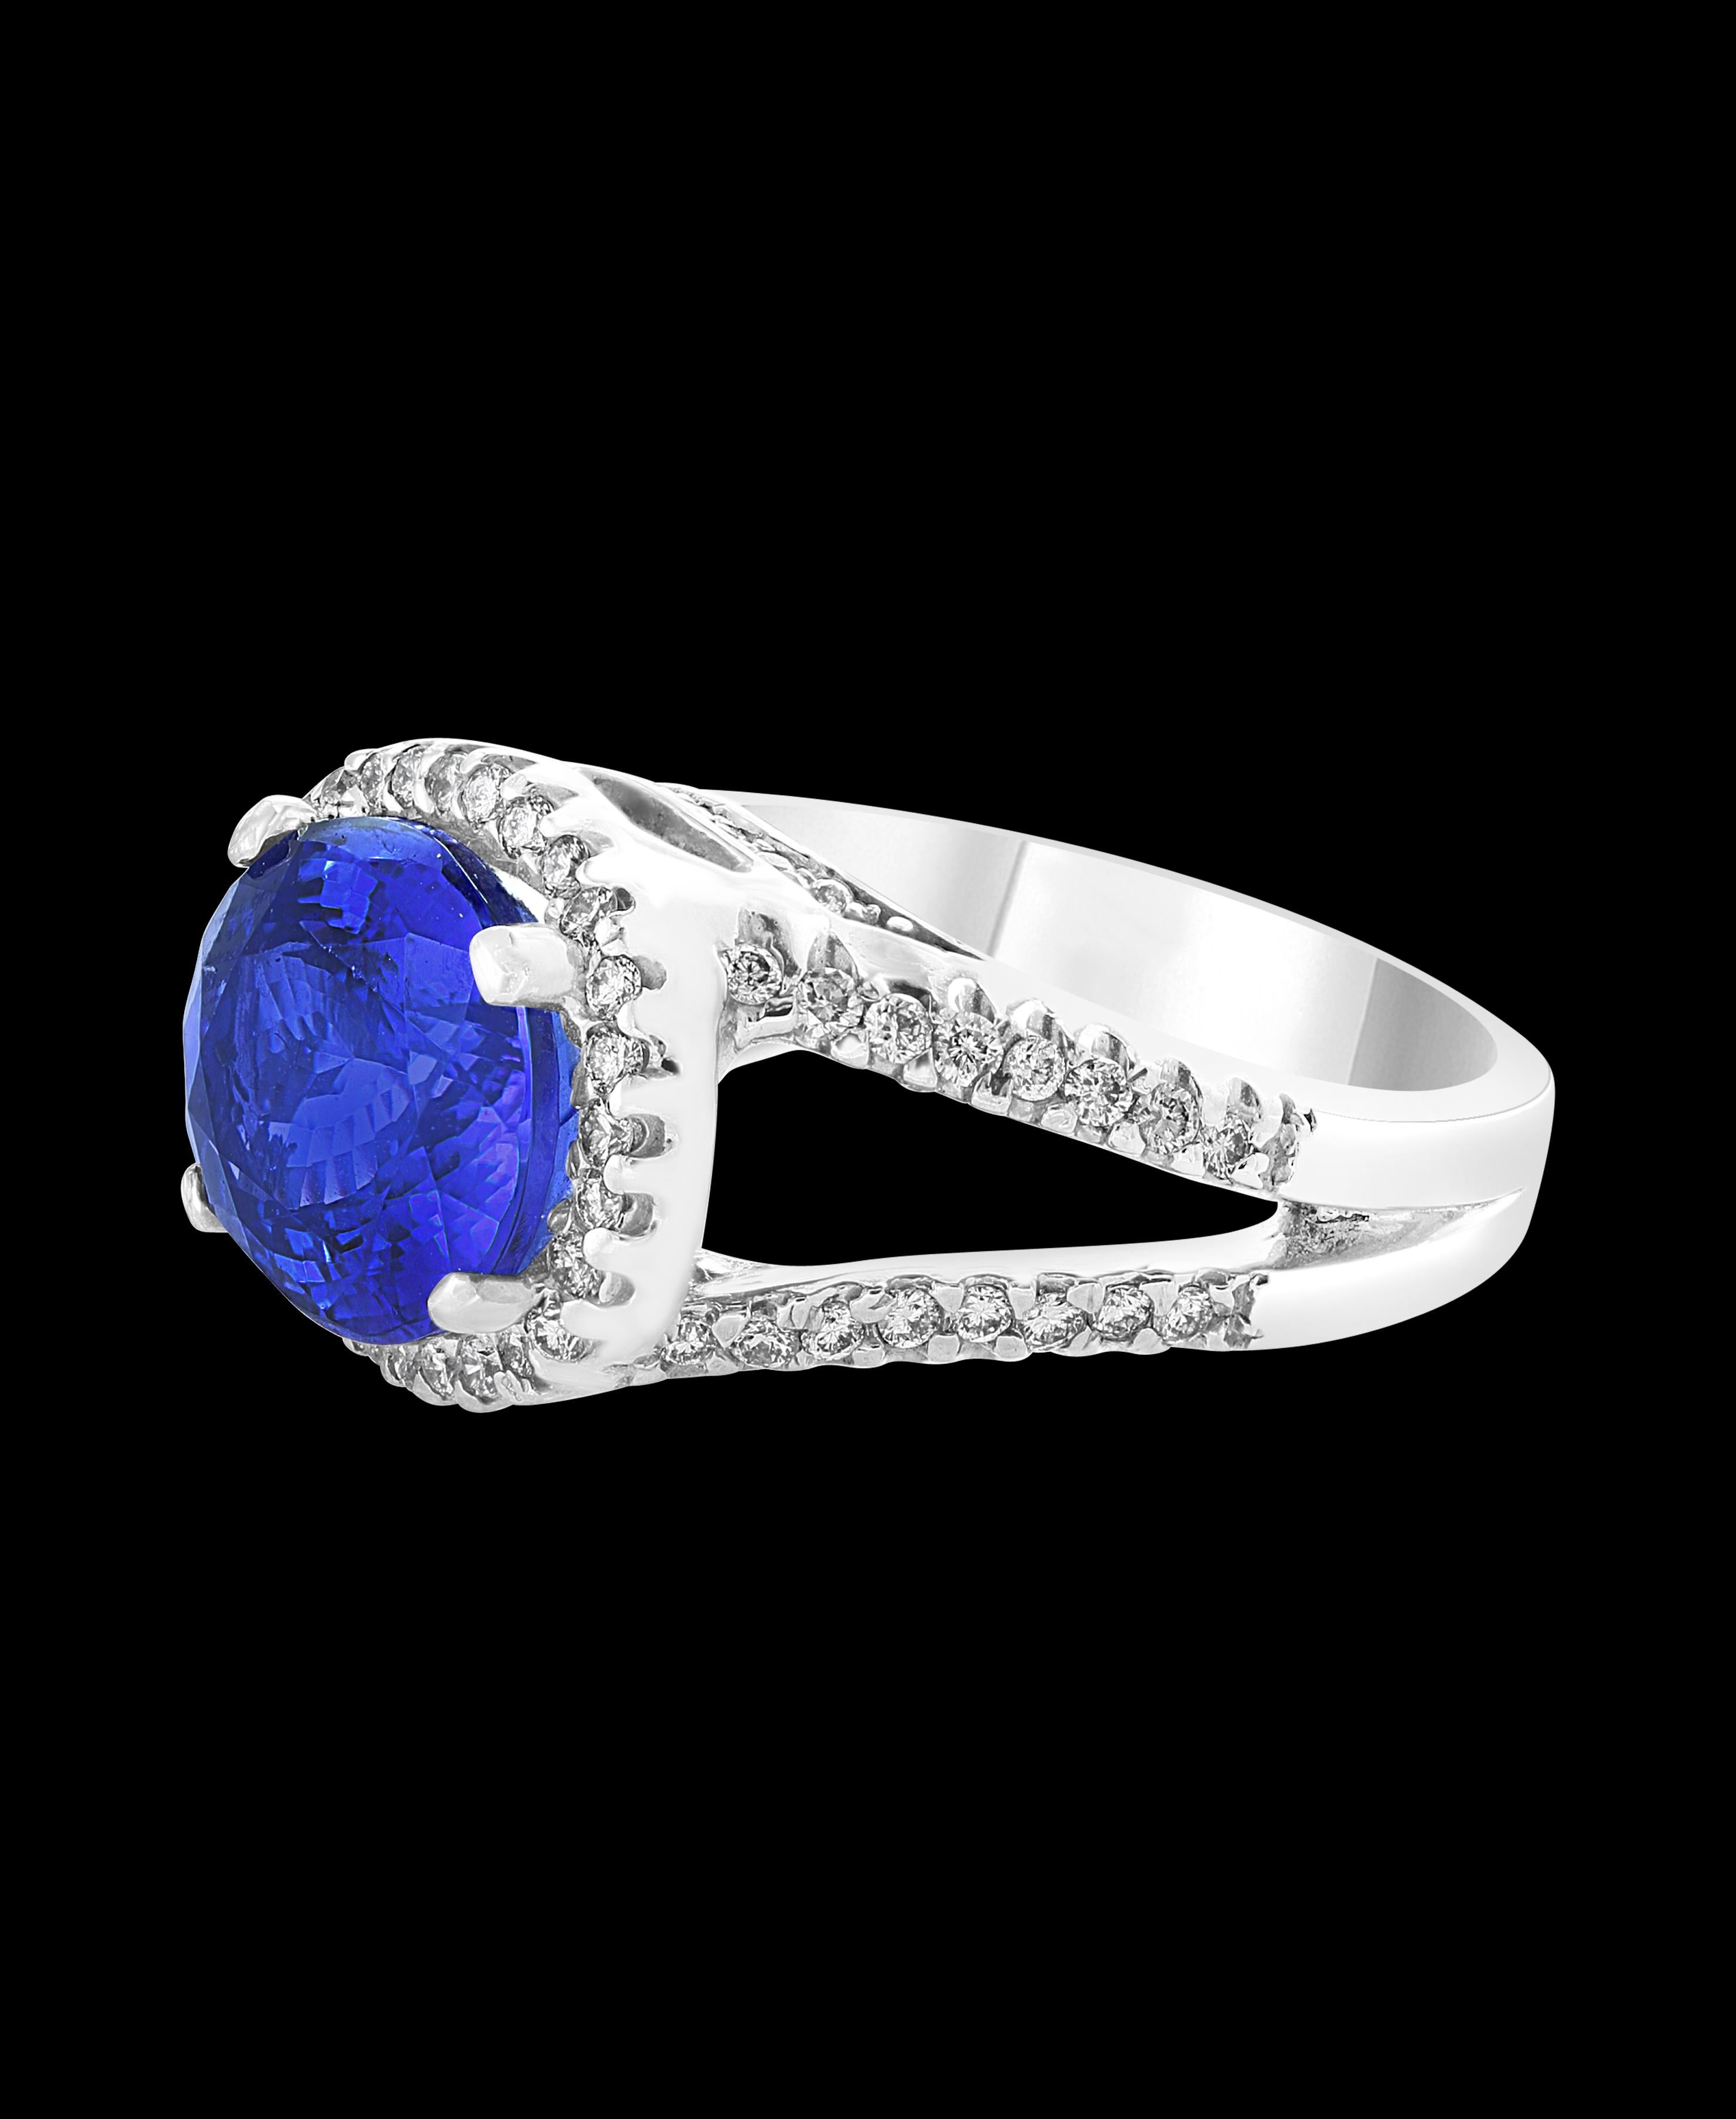 This extraordinary, 6 carat tanzanite is truly an extraordinary gemstone. There are  total  of 1.1 carats of shimmering white diamonds, this brilliant Oval-cut gem exhibits the rich violetish-blue color for which these stones are known and so highly